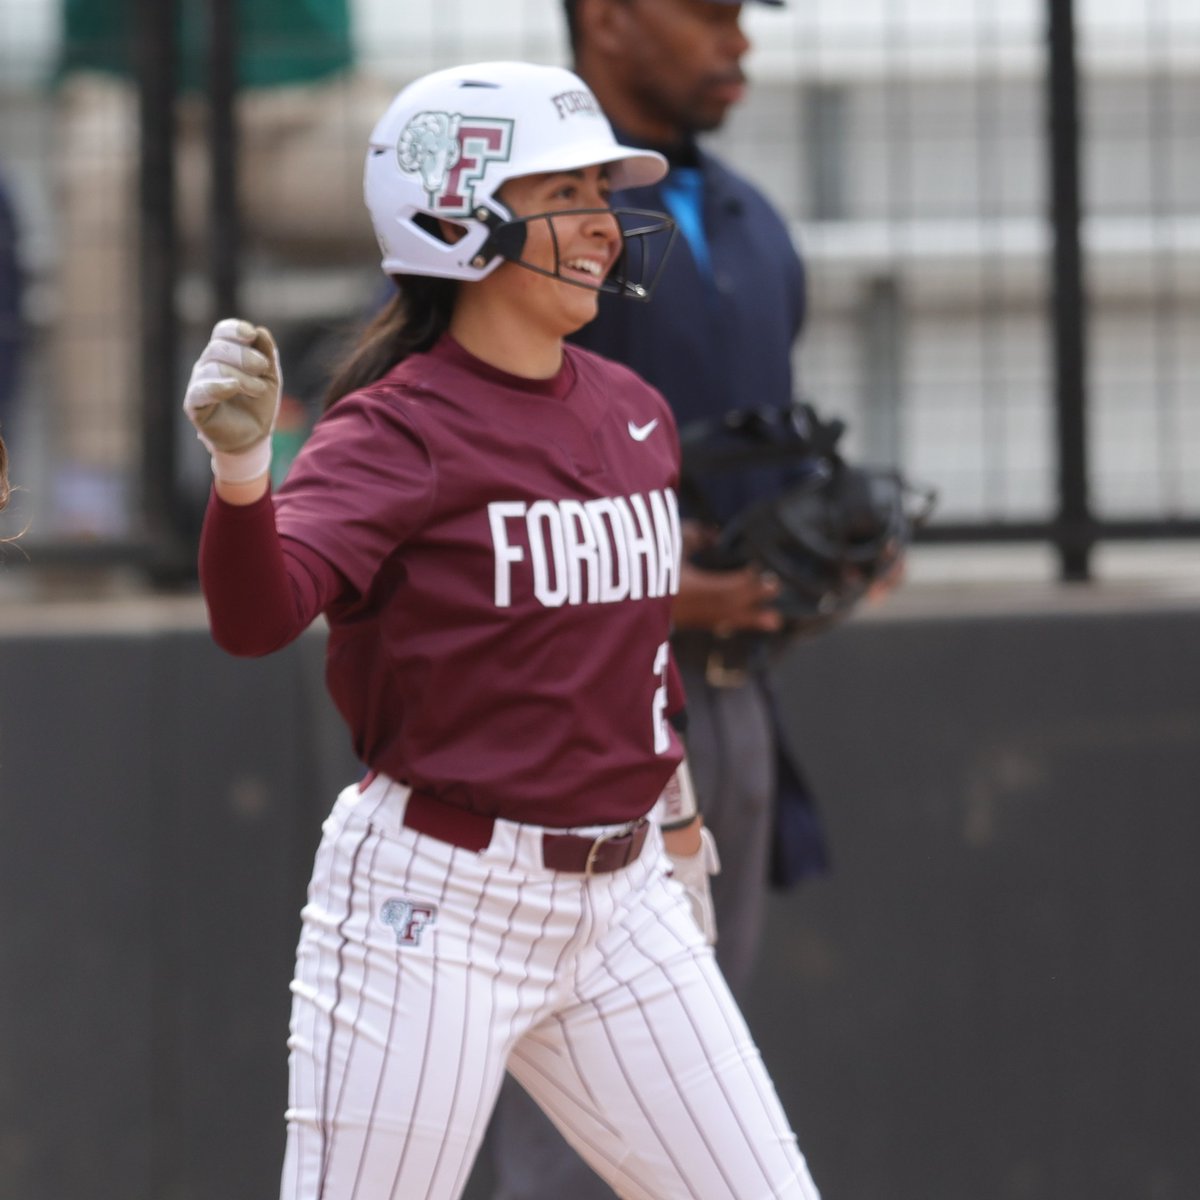 A pair of singles scores ✌️ in the first as the Rams take an early lead against the Pride!

MID 1ST | Rams 2️⃣, Pride 0️⃣

📺 @FloSoftball
🎥 tinyurl.com/henuebxn
📊 tinyurl.com/muhepb6a

#BronxBuilt | #A10SB